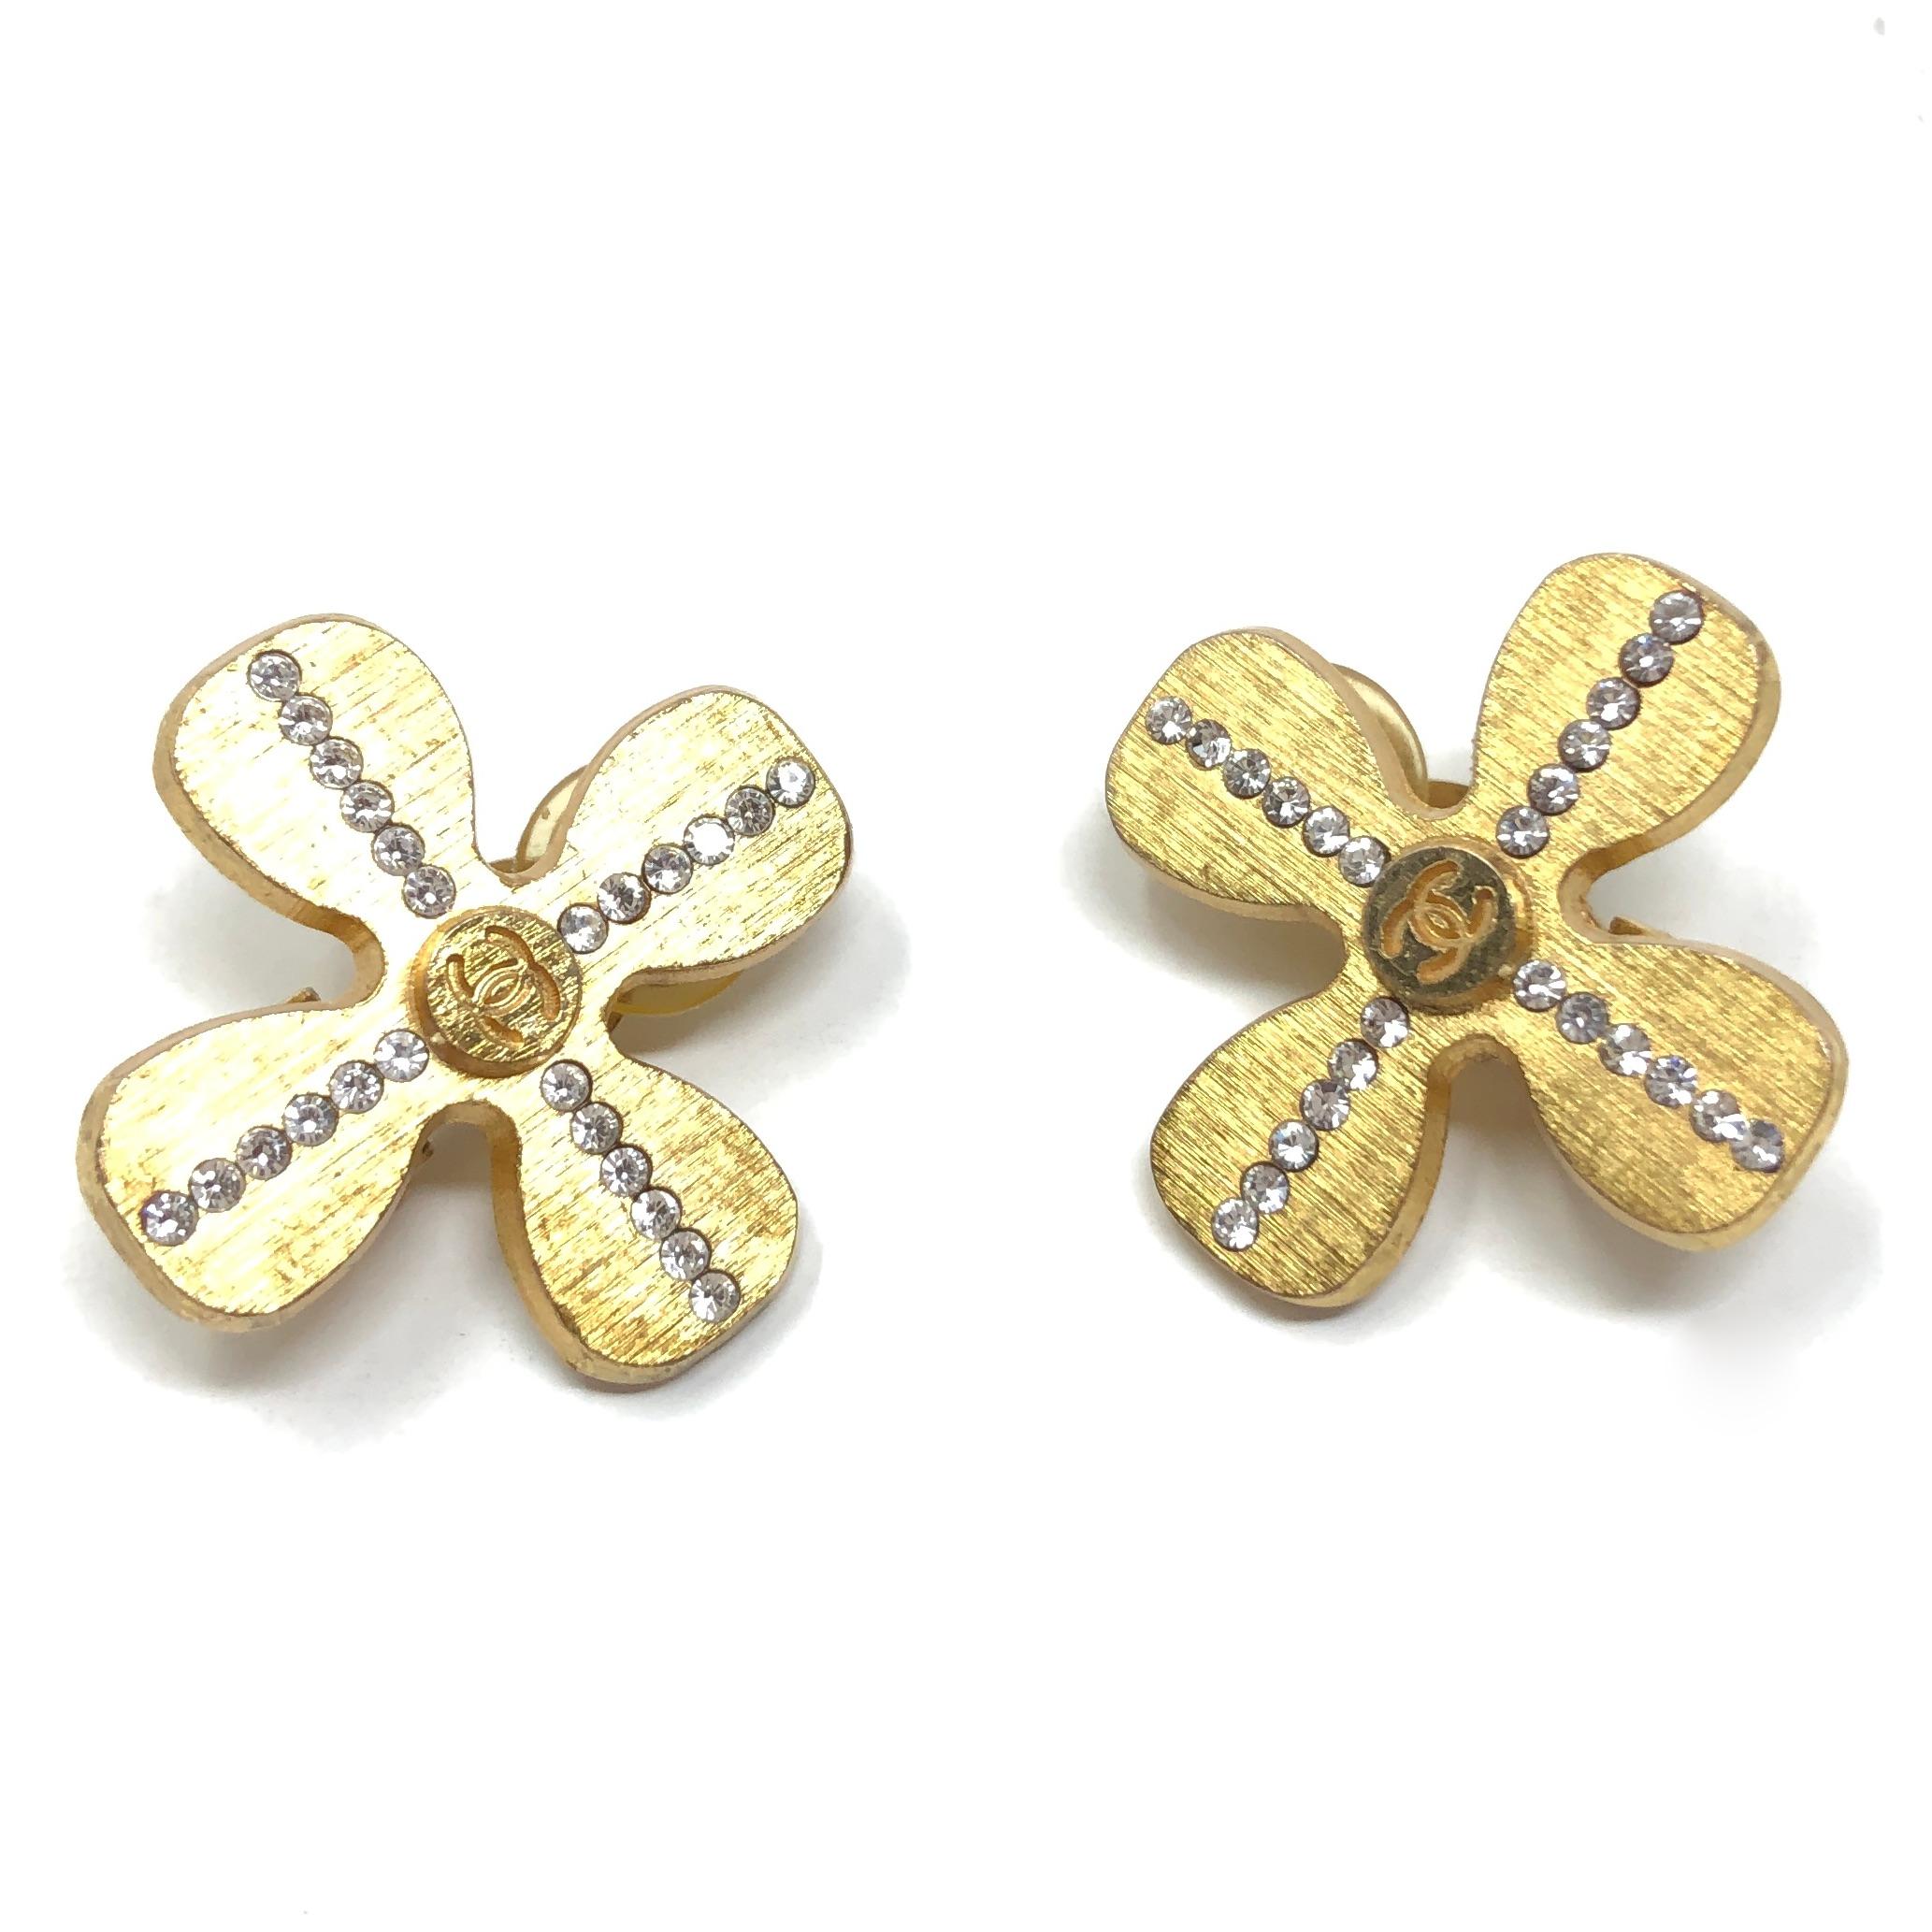 A wardrobe essential - these chic and timeless earrings were created by Chanel in 2001. They are clip on. 

Condition Report:
Very Good - A little darkening to the plating in a couple of tiny areas on the earrings. This is only visible upon very